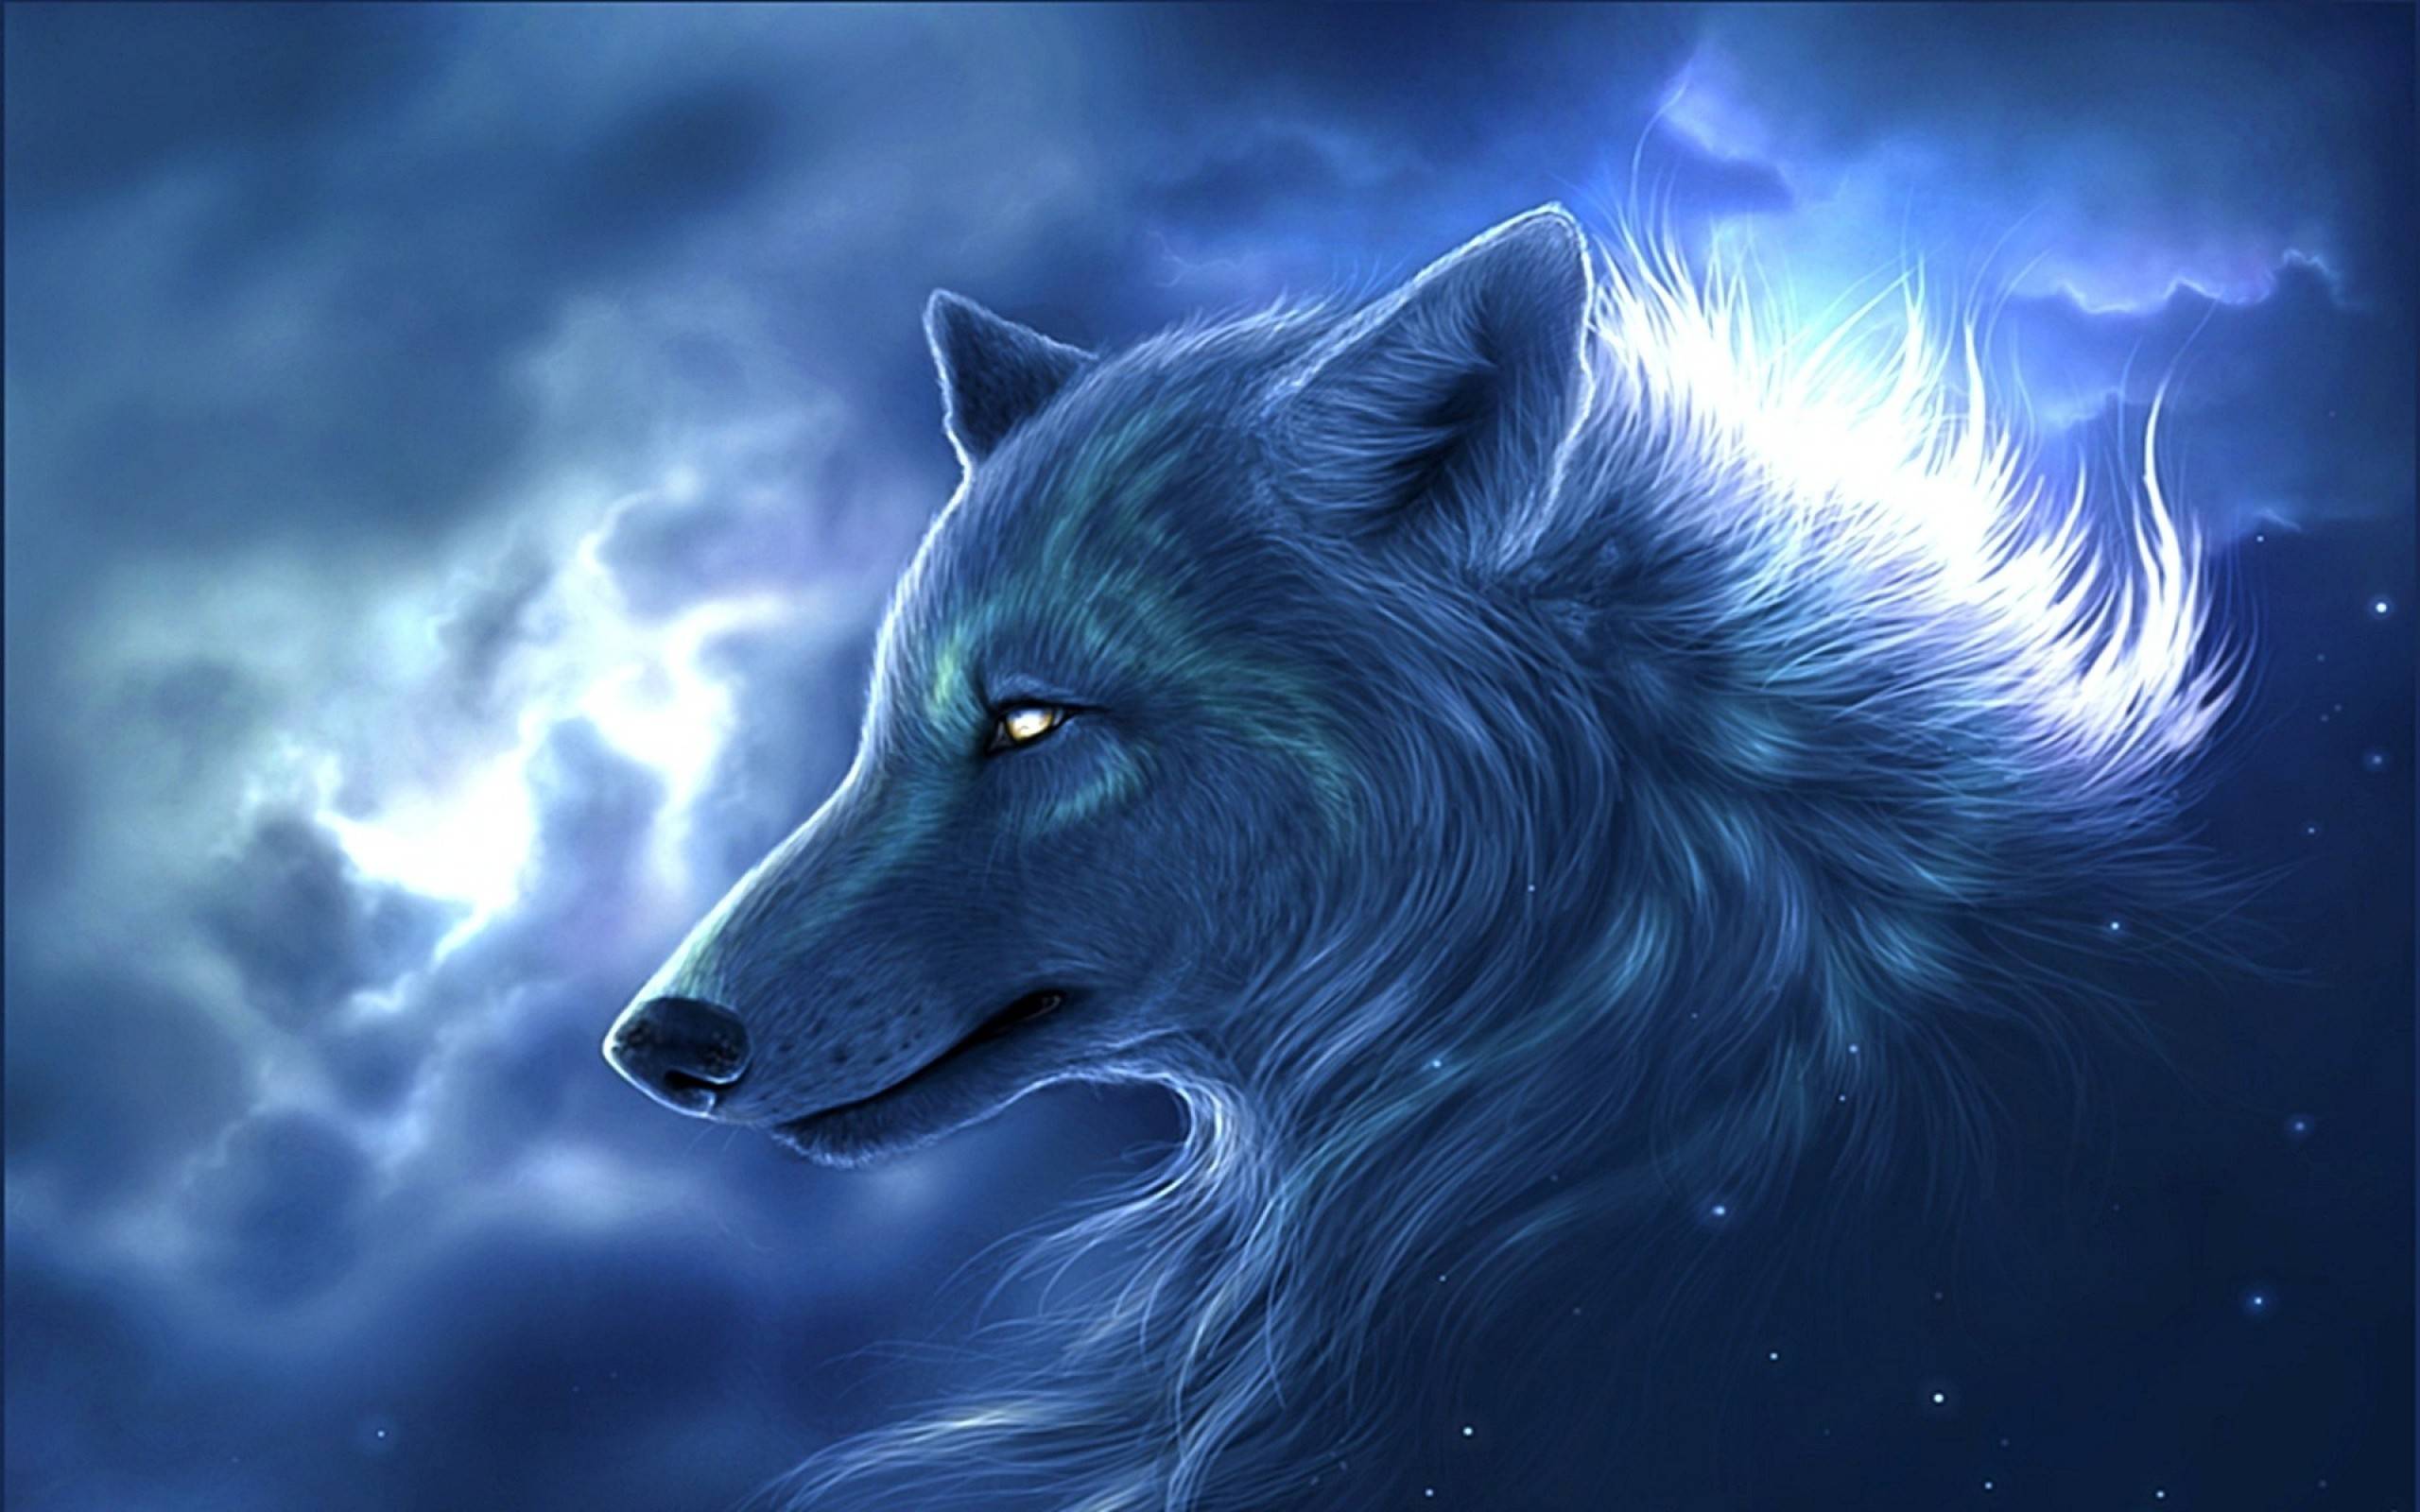 Wallpaper Mystical Wallpaper Wolf Photos Download and use 10,000+ wolf wallpaper stock photos for free. wallpaper mystical wallpaper wolf photos